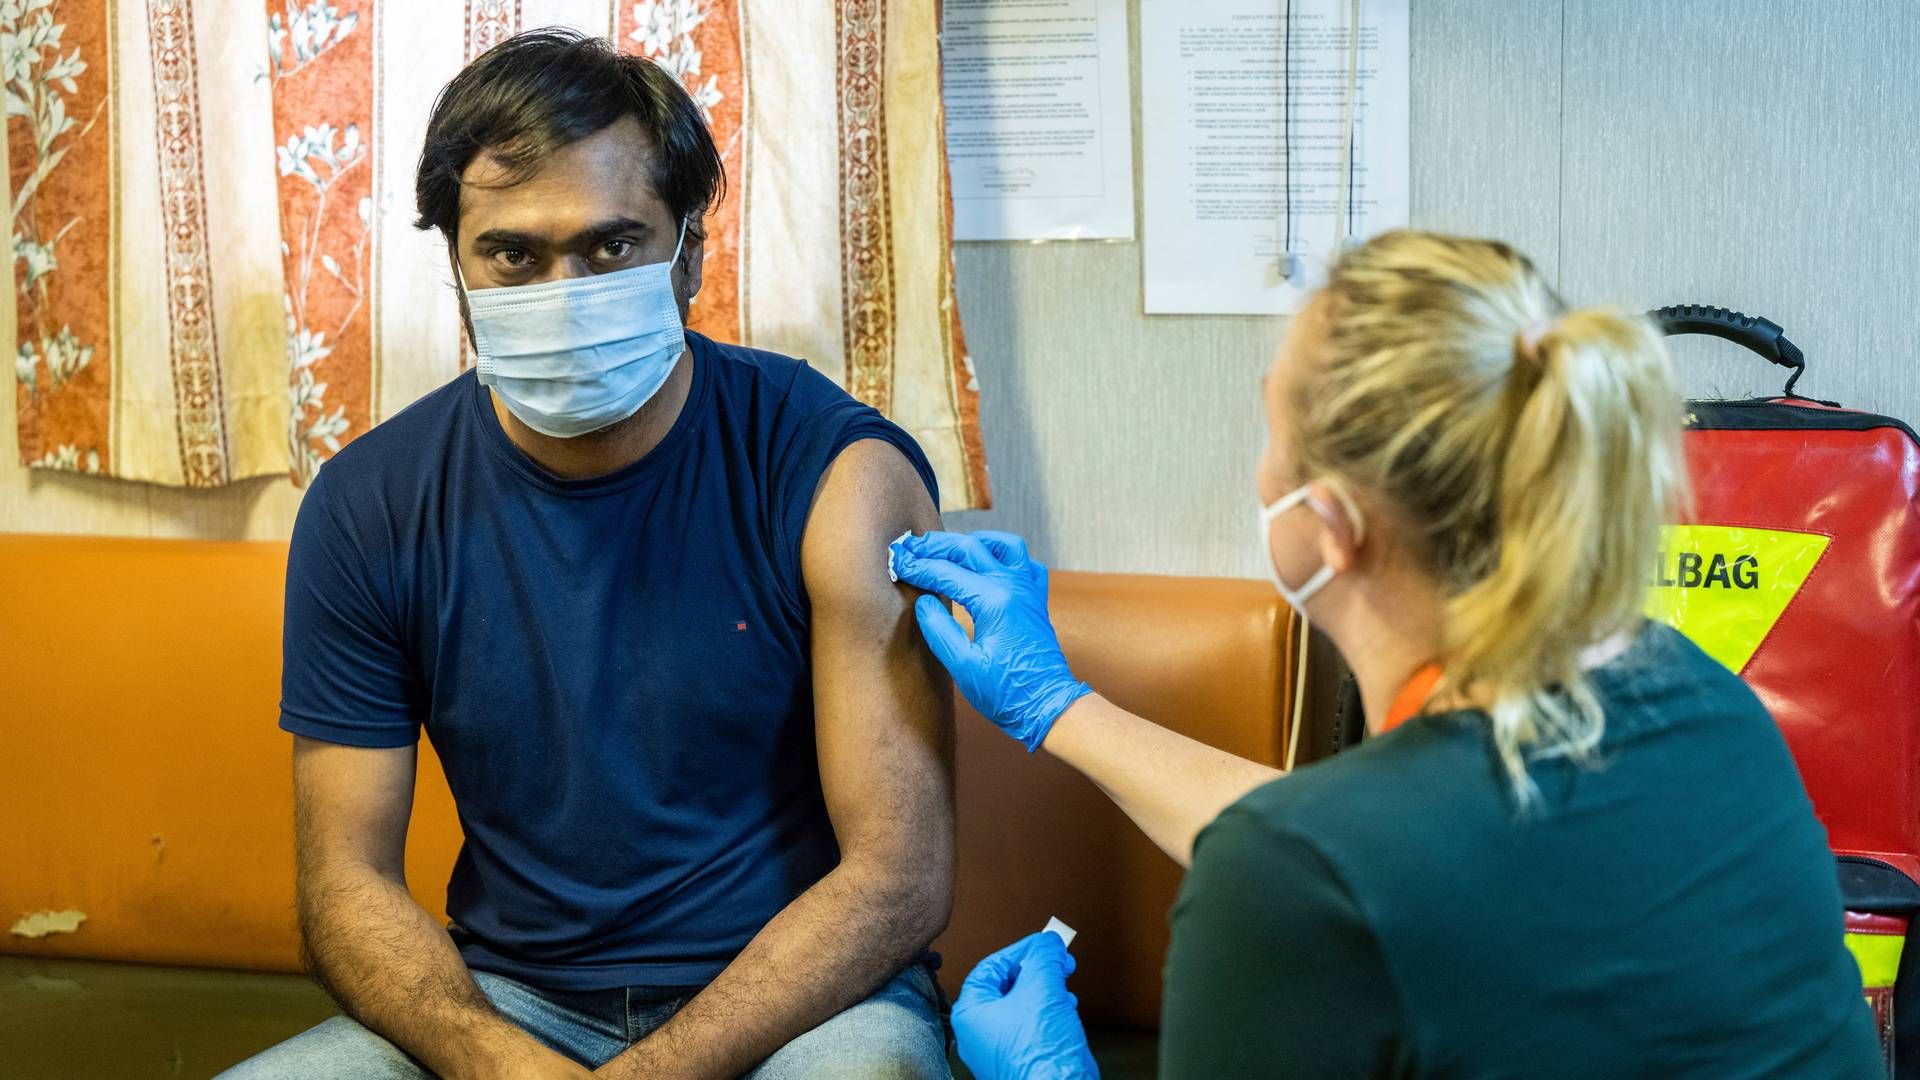 The coronavirus pandemic gave shipping a bad image as a workplace because thousands of seafarers were trapped on their ships for many months. Here, a seafarer is vaccinated in Bremen, Germany. | Photo: Mohssen Assanimoghaddam/AP/Ritzau Scanpix